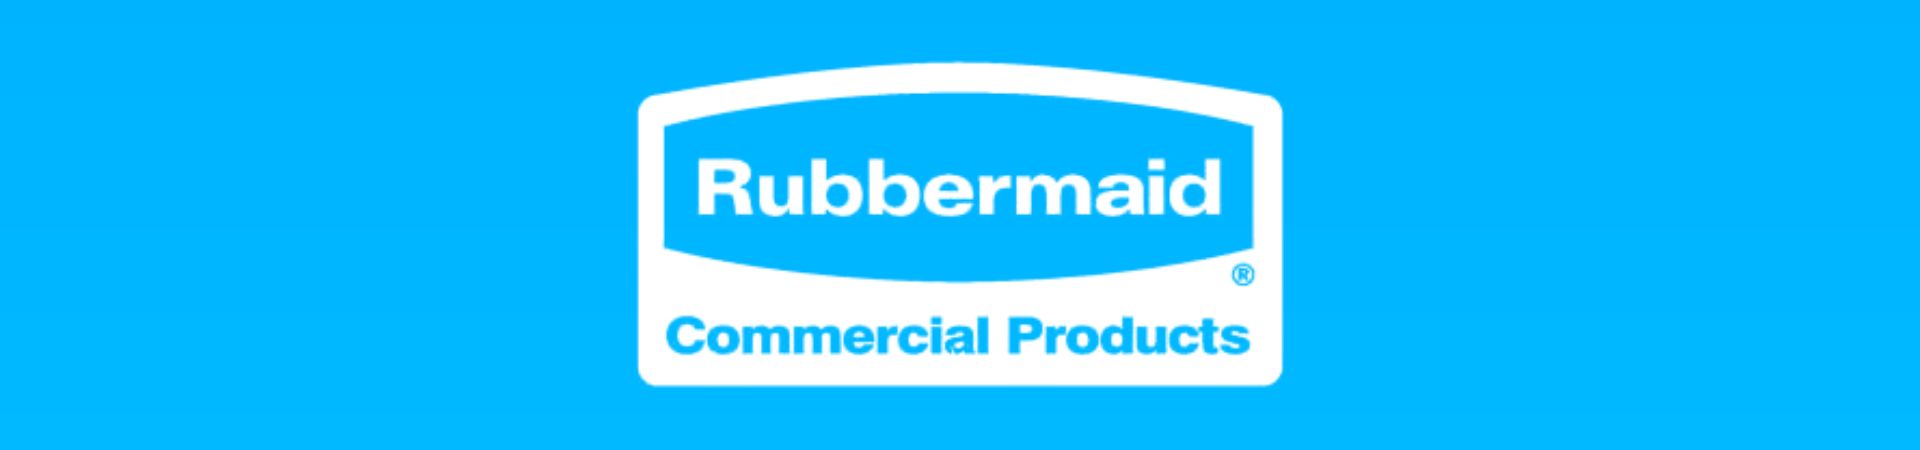 Rubbermaid Comercial Products